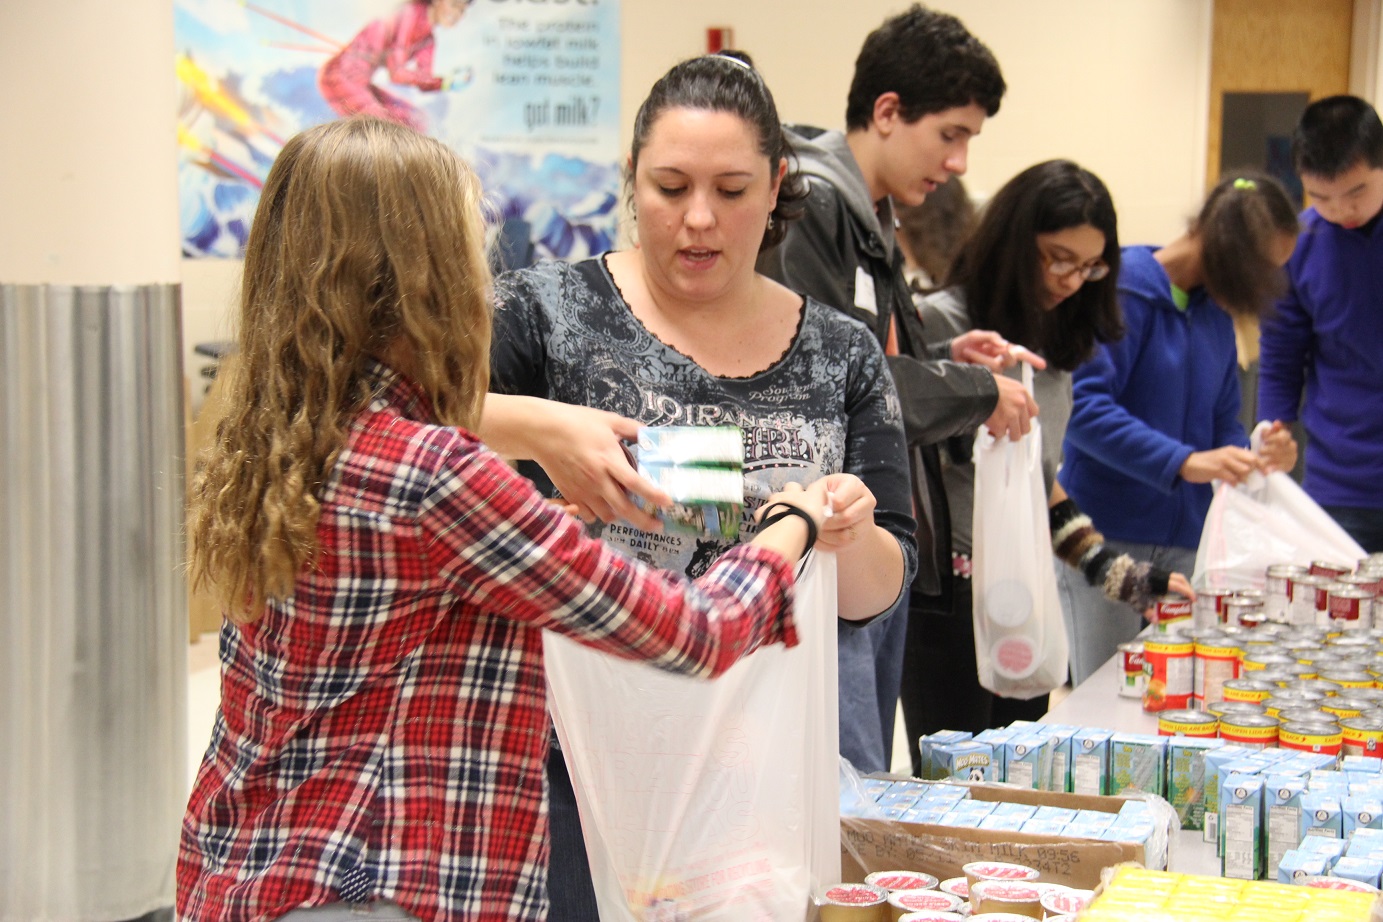 Volunteers created assembly lines to pack Beach Bags with non-perishable food.